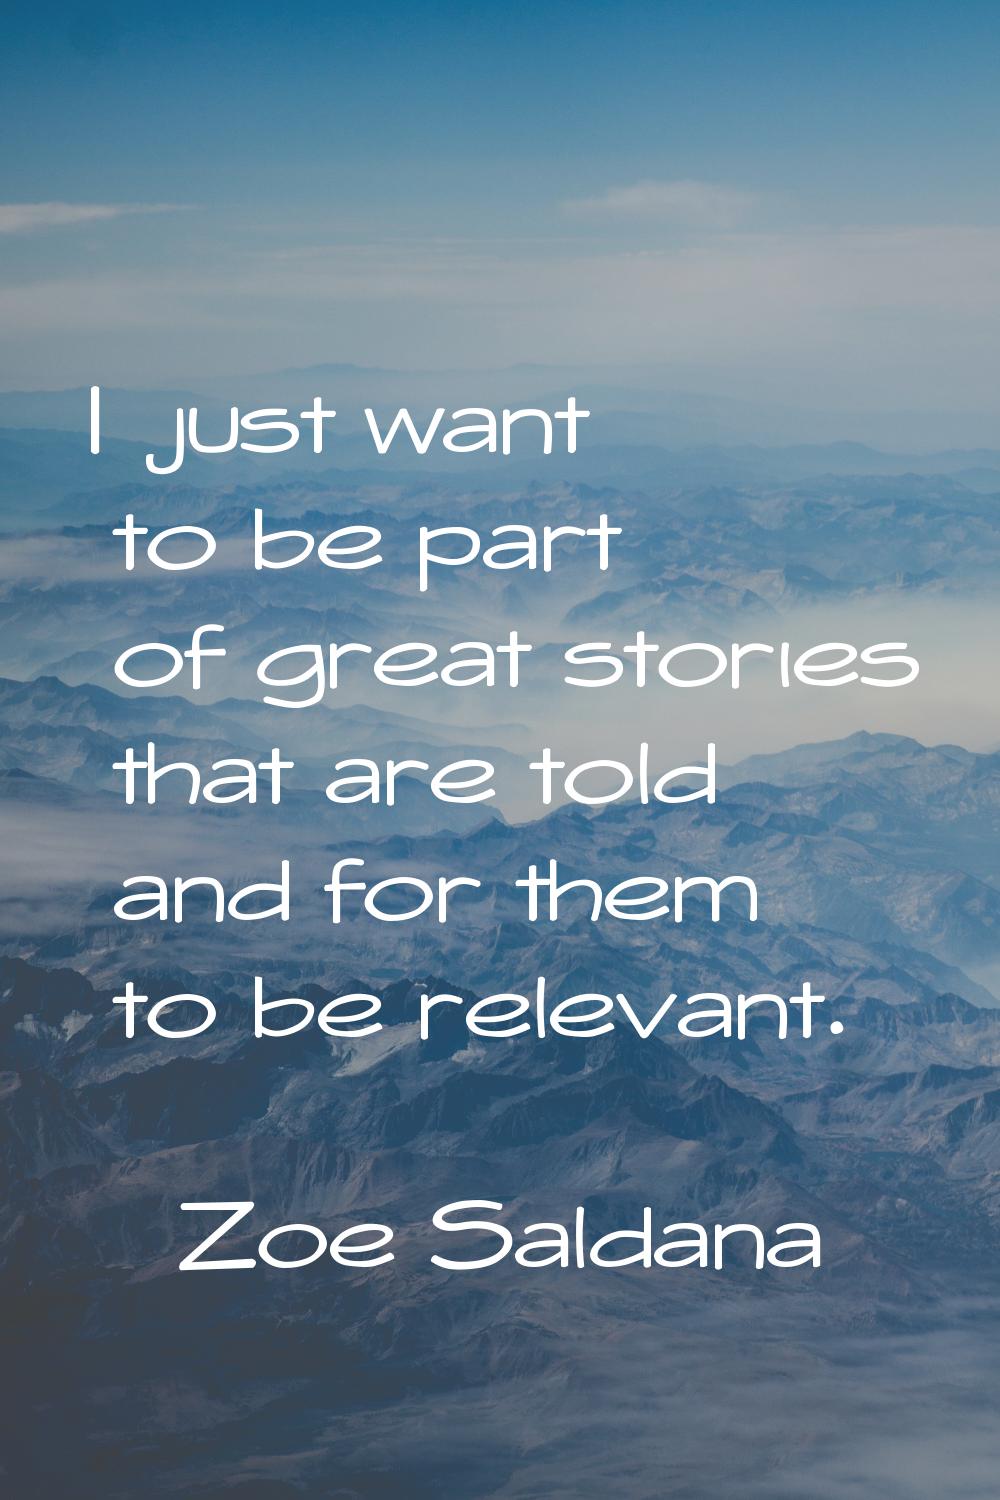 I just want to be part of great stories that are told and for them to be relevant.